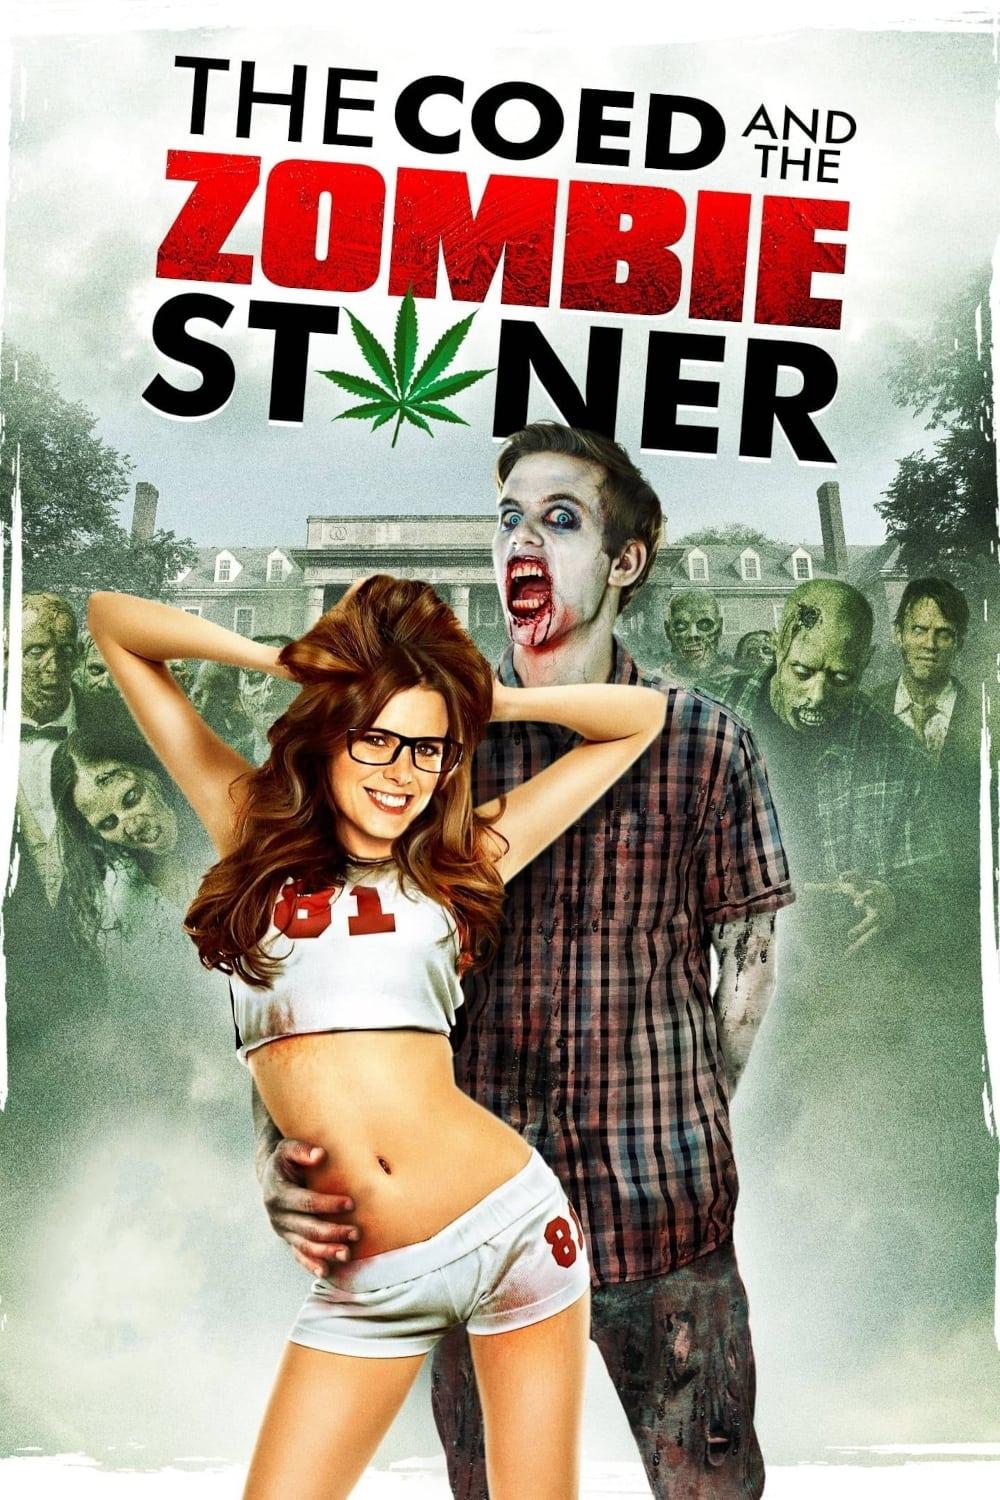 The Coed and the Zombie Stoner poster